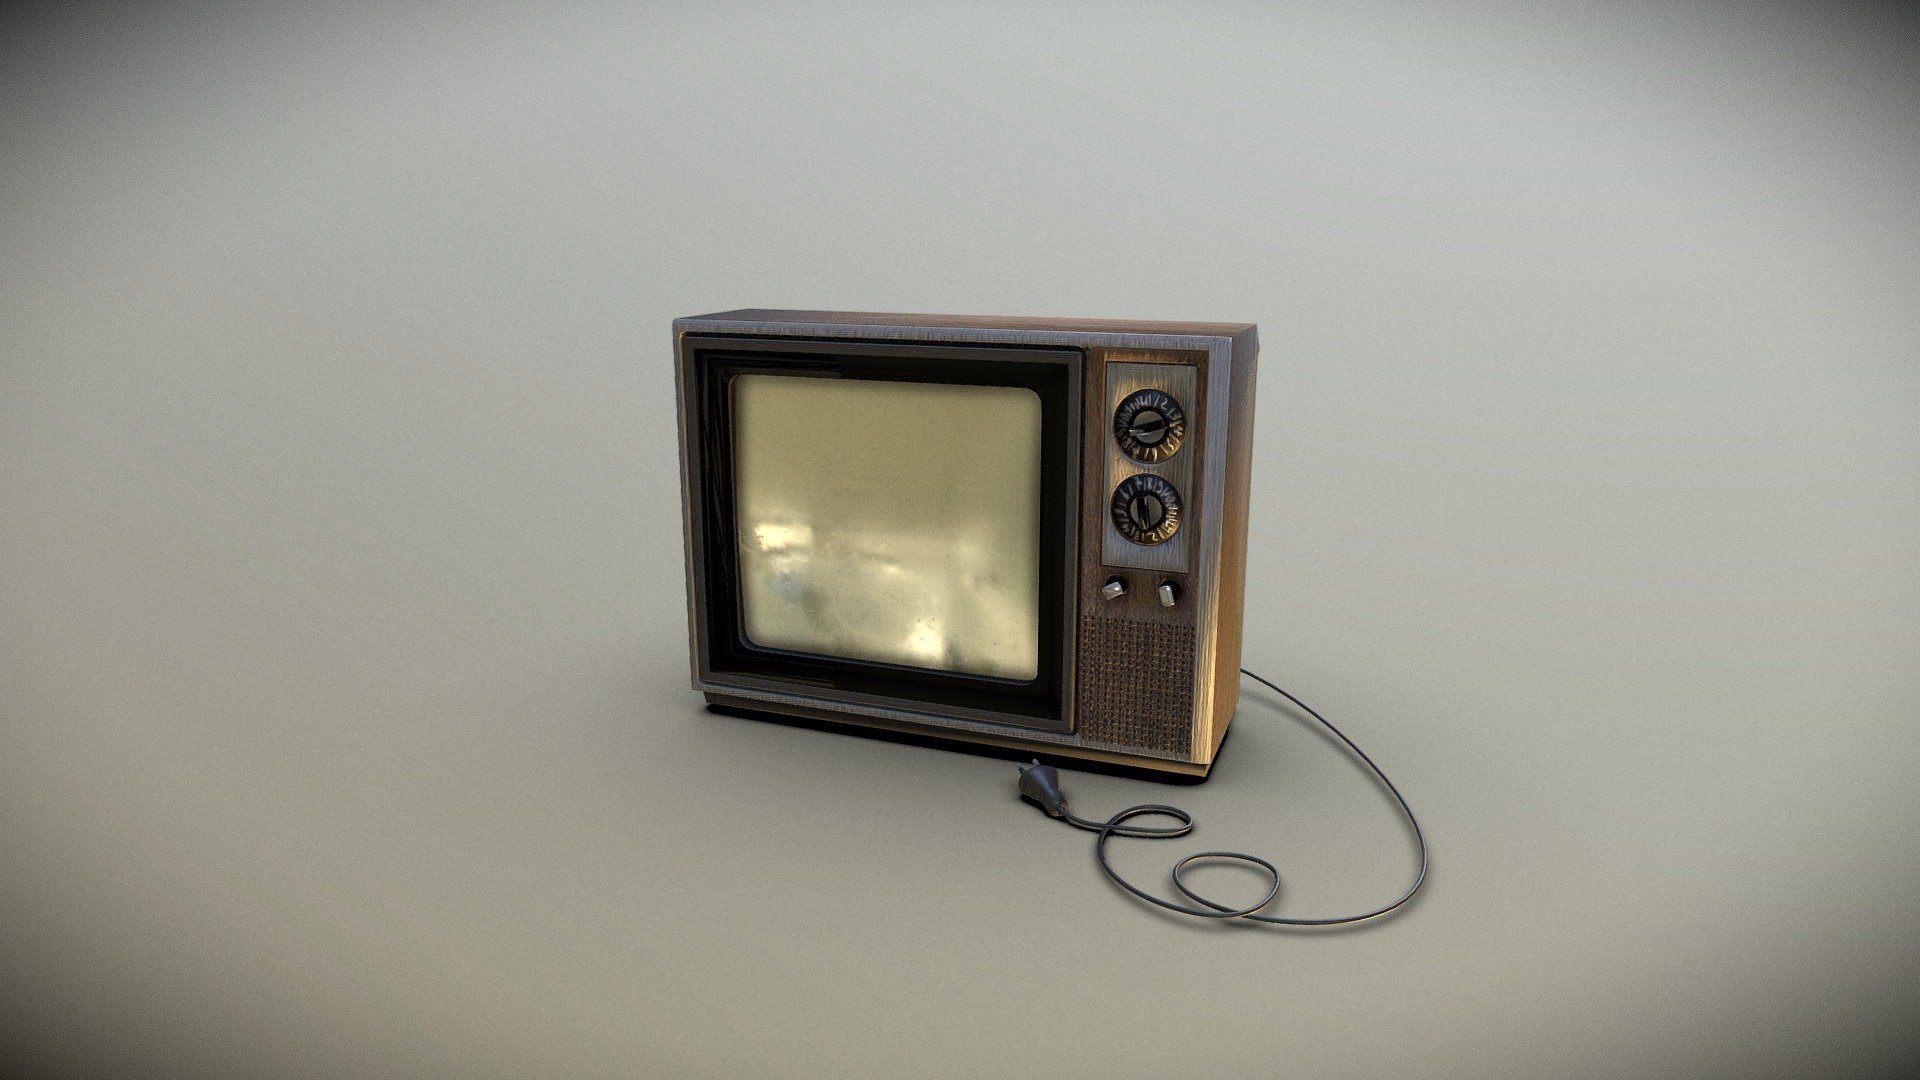 Wooden frame TV, cathodic television that could've been seen in most of 80's to the late 90's houses. Old But Gold!
Modeled in Blender 3.2.1 - Retro CRT Tv, 80's - Buy Royalty Free 3D model by Smoothie 3D (@arisyn08) 3d model